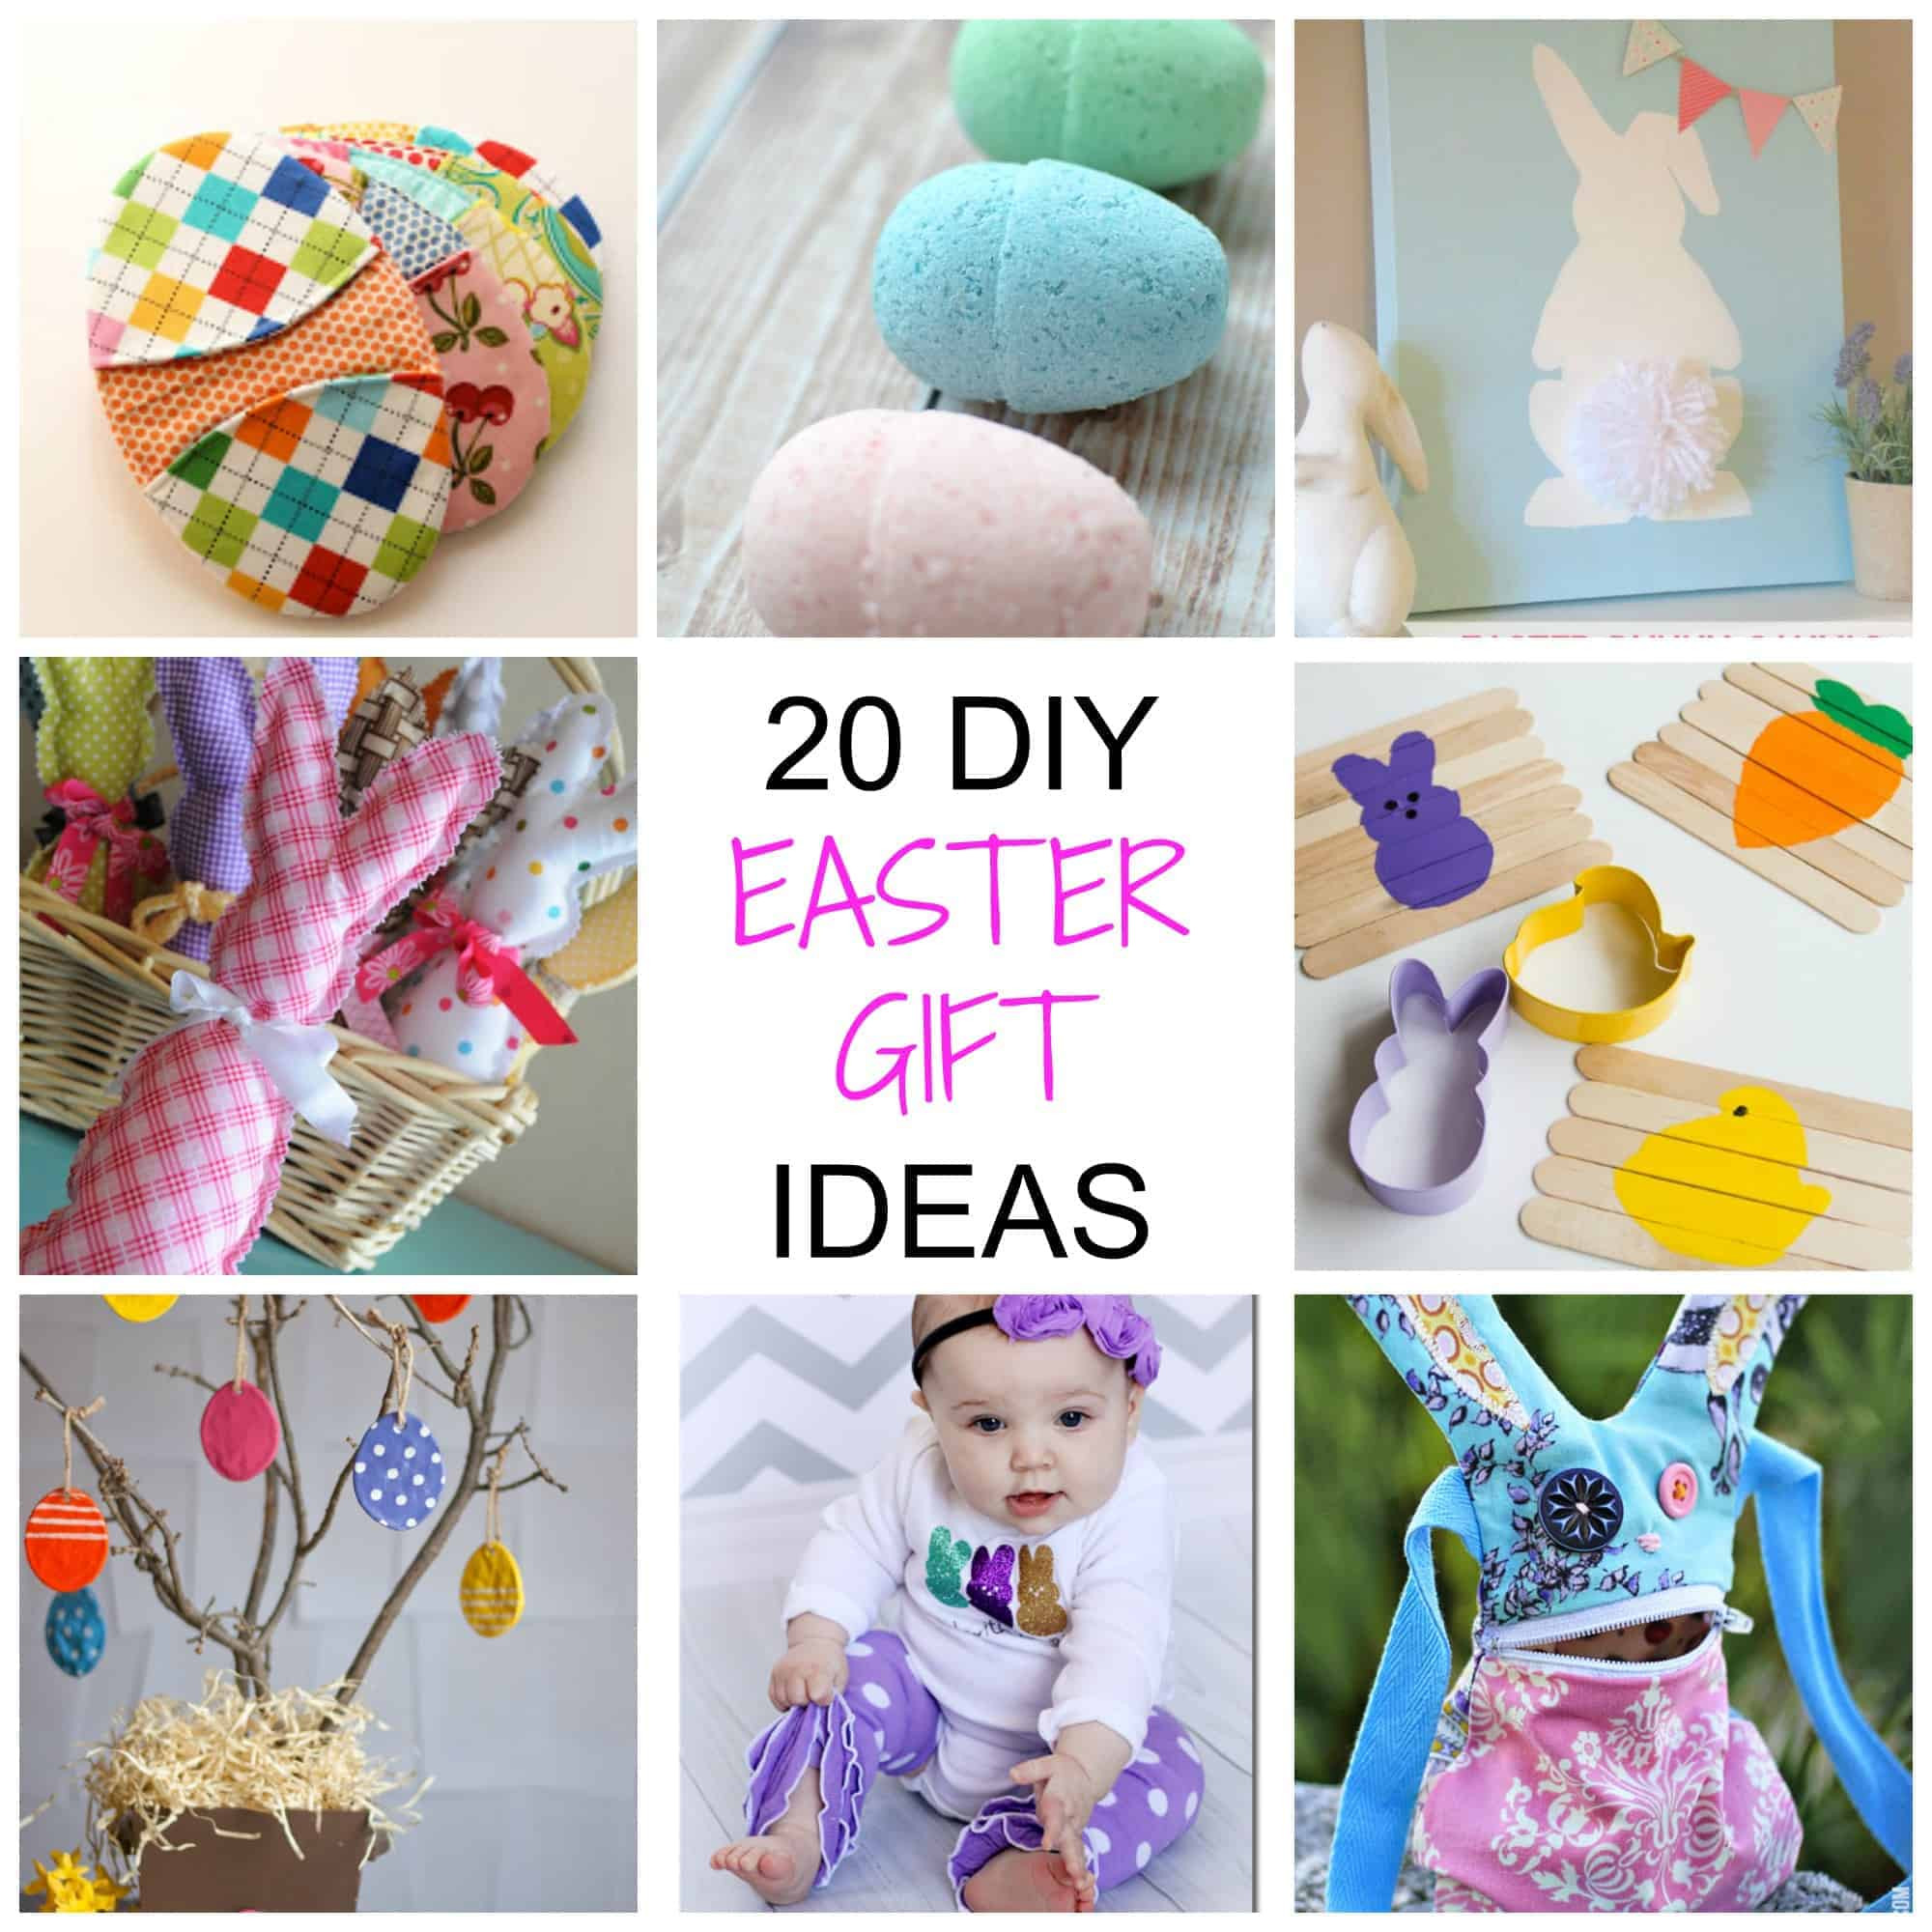 DIY Easter Gifts
 20 Non Chocolate DIY Easter Gifts Simplify Create Inspire